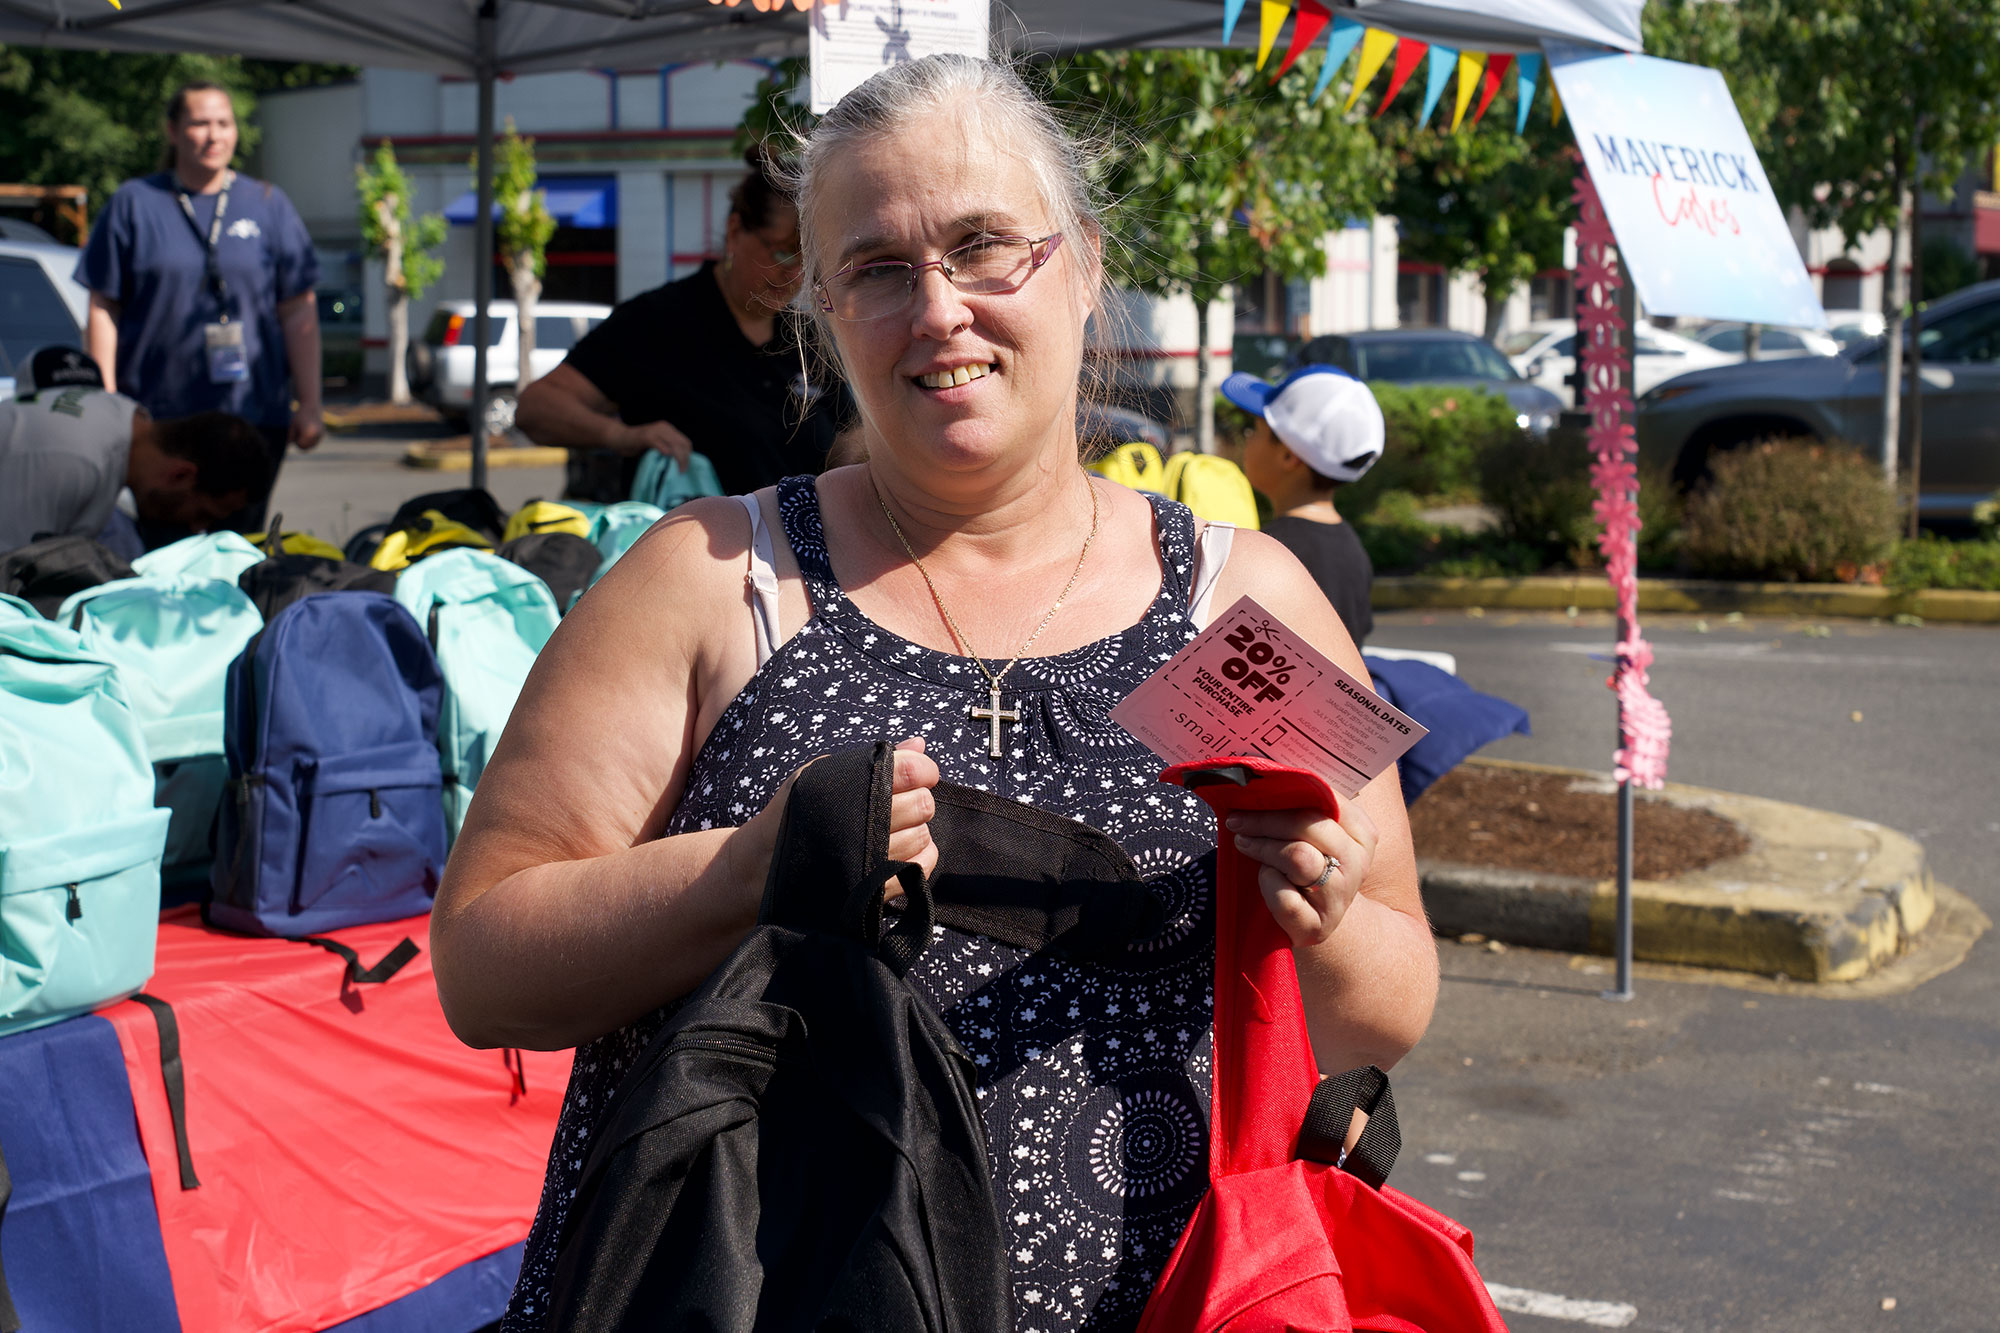 A woman with glasses holding a card and two backpacks